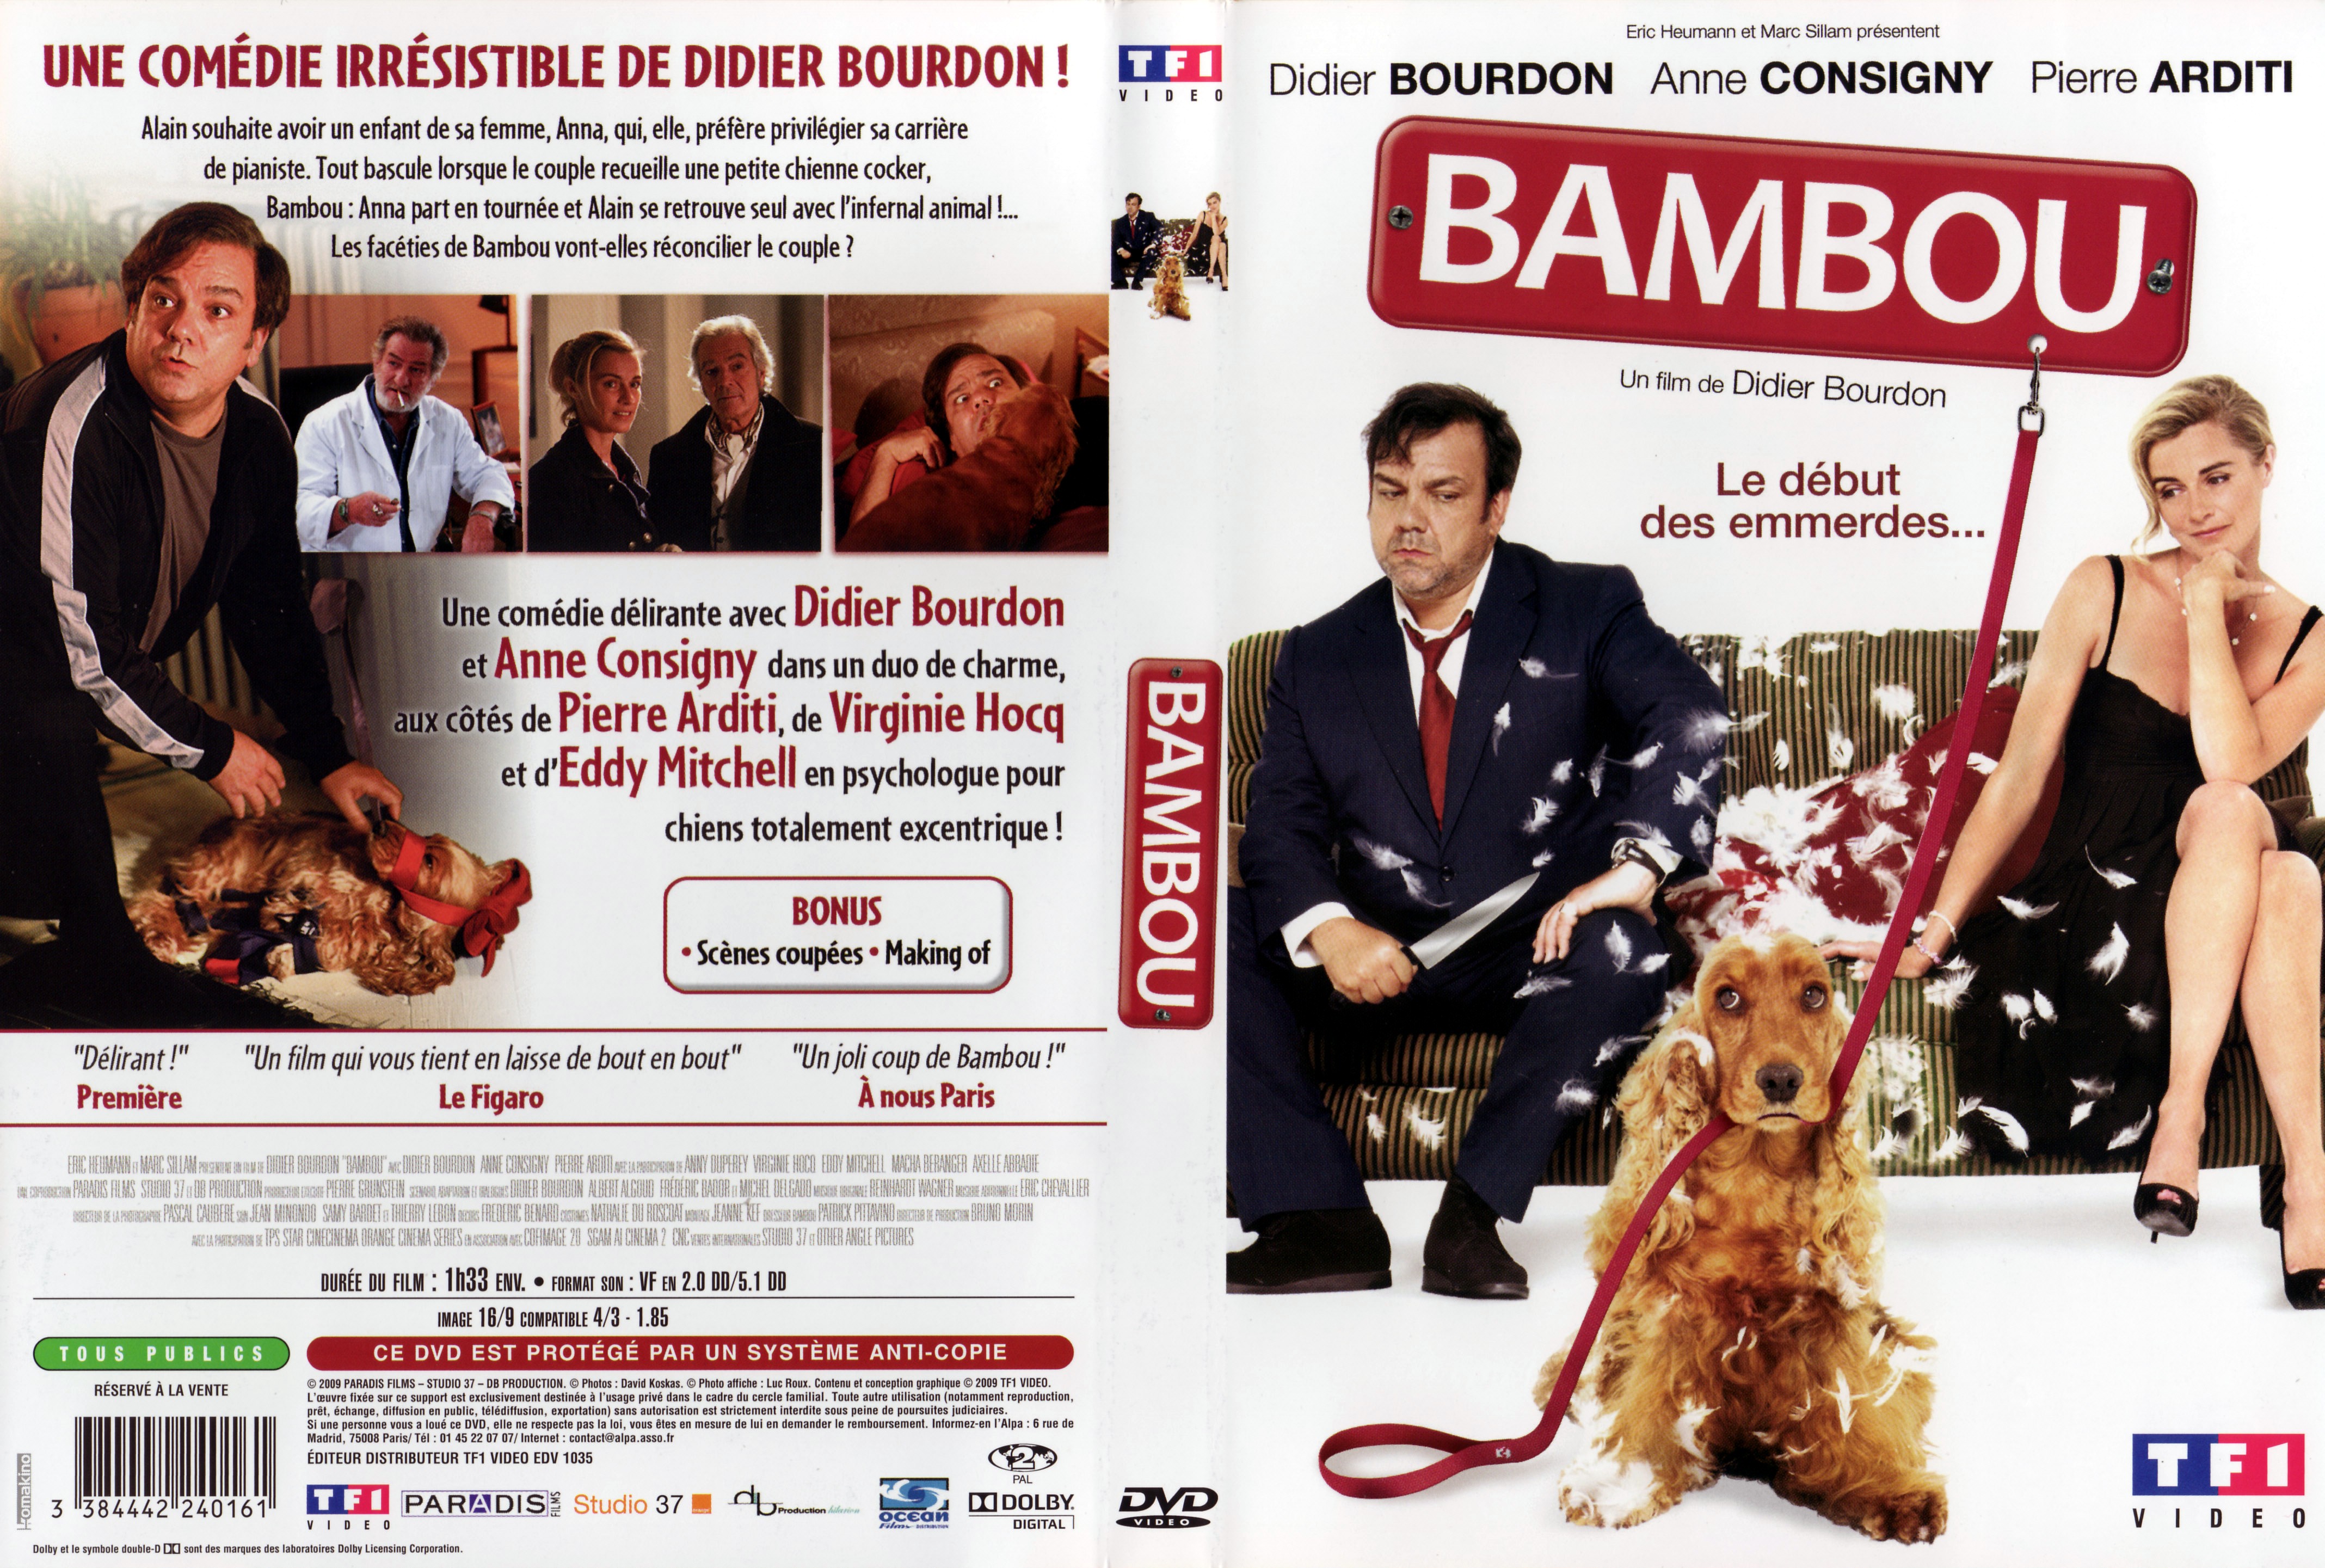 Jaquette DVD Bambou